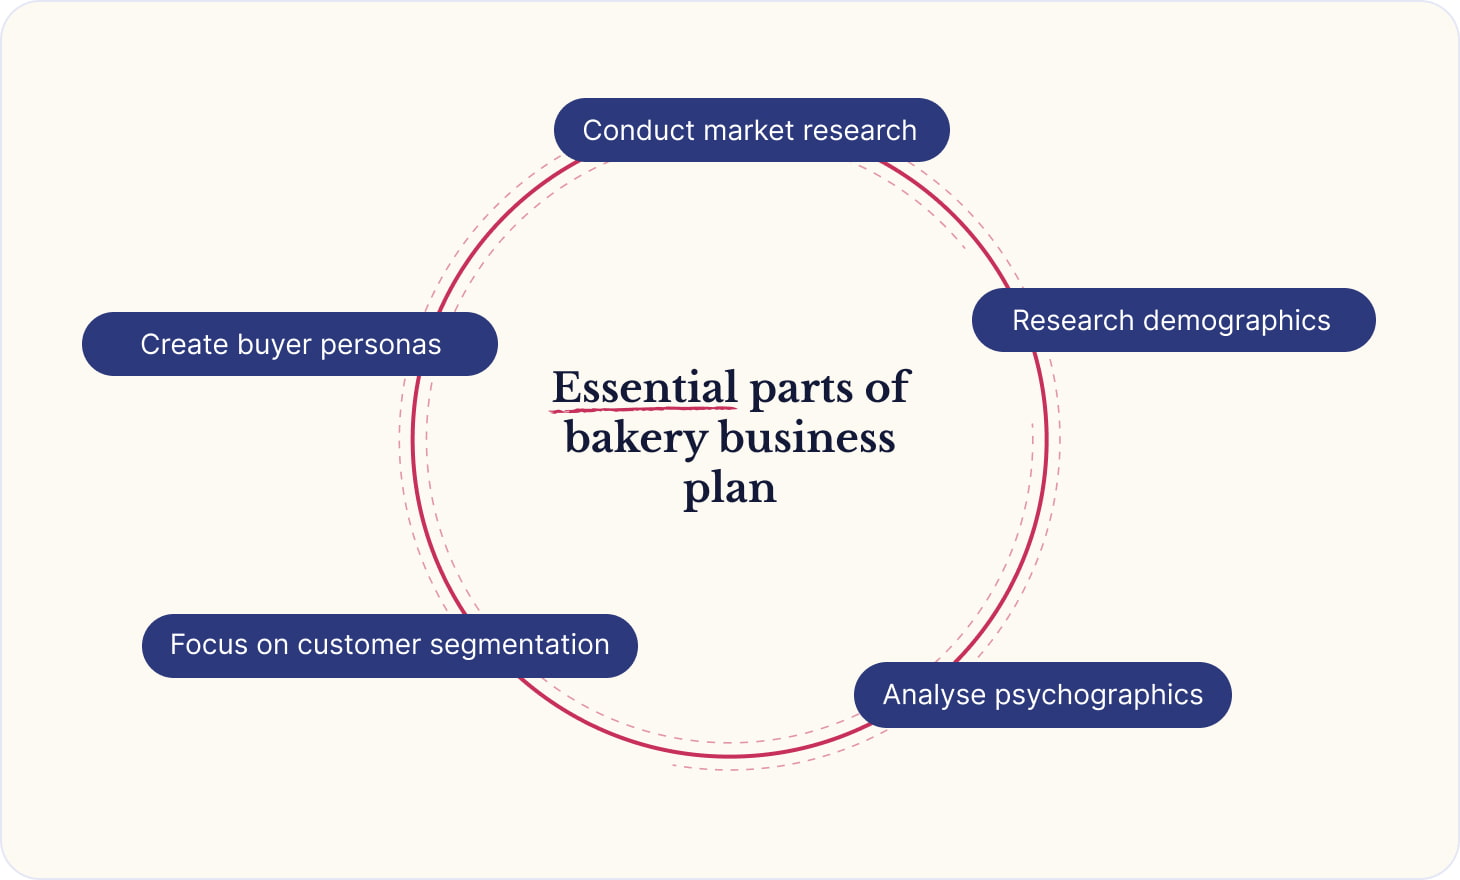 Vital parts of bakery business plan